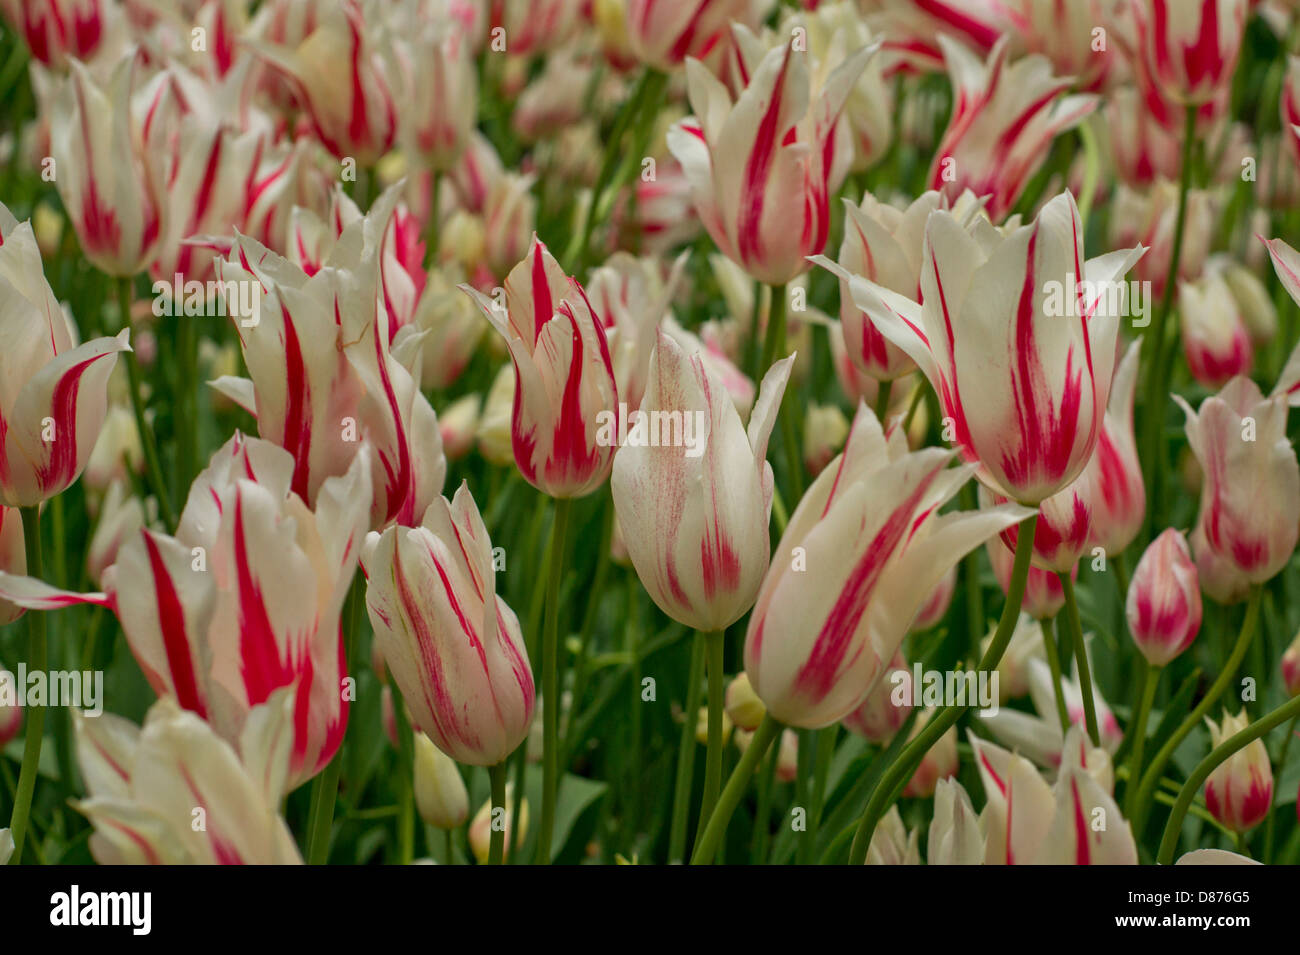 Striped red and white Marilyn lily Tulips Stock Photo